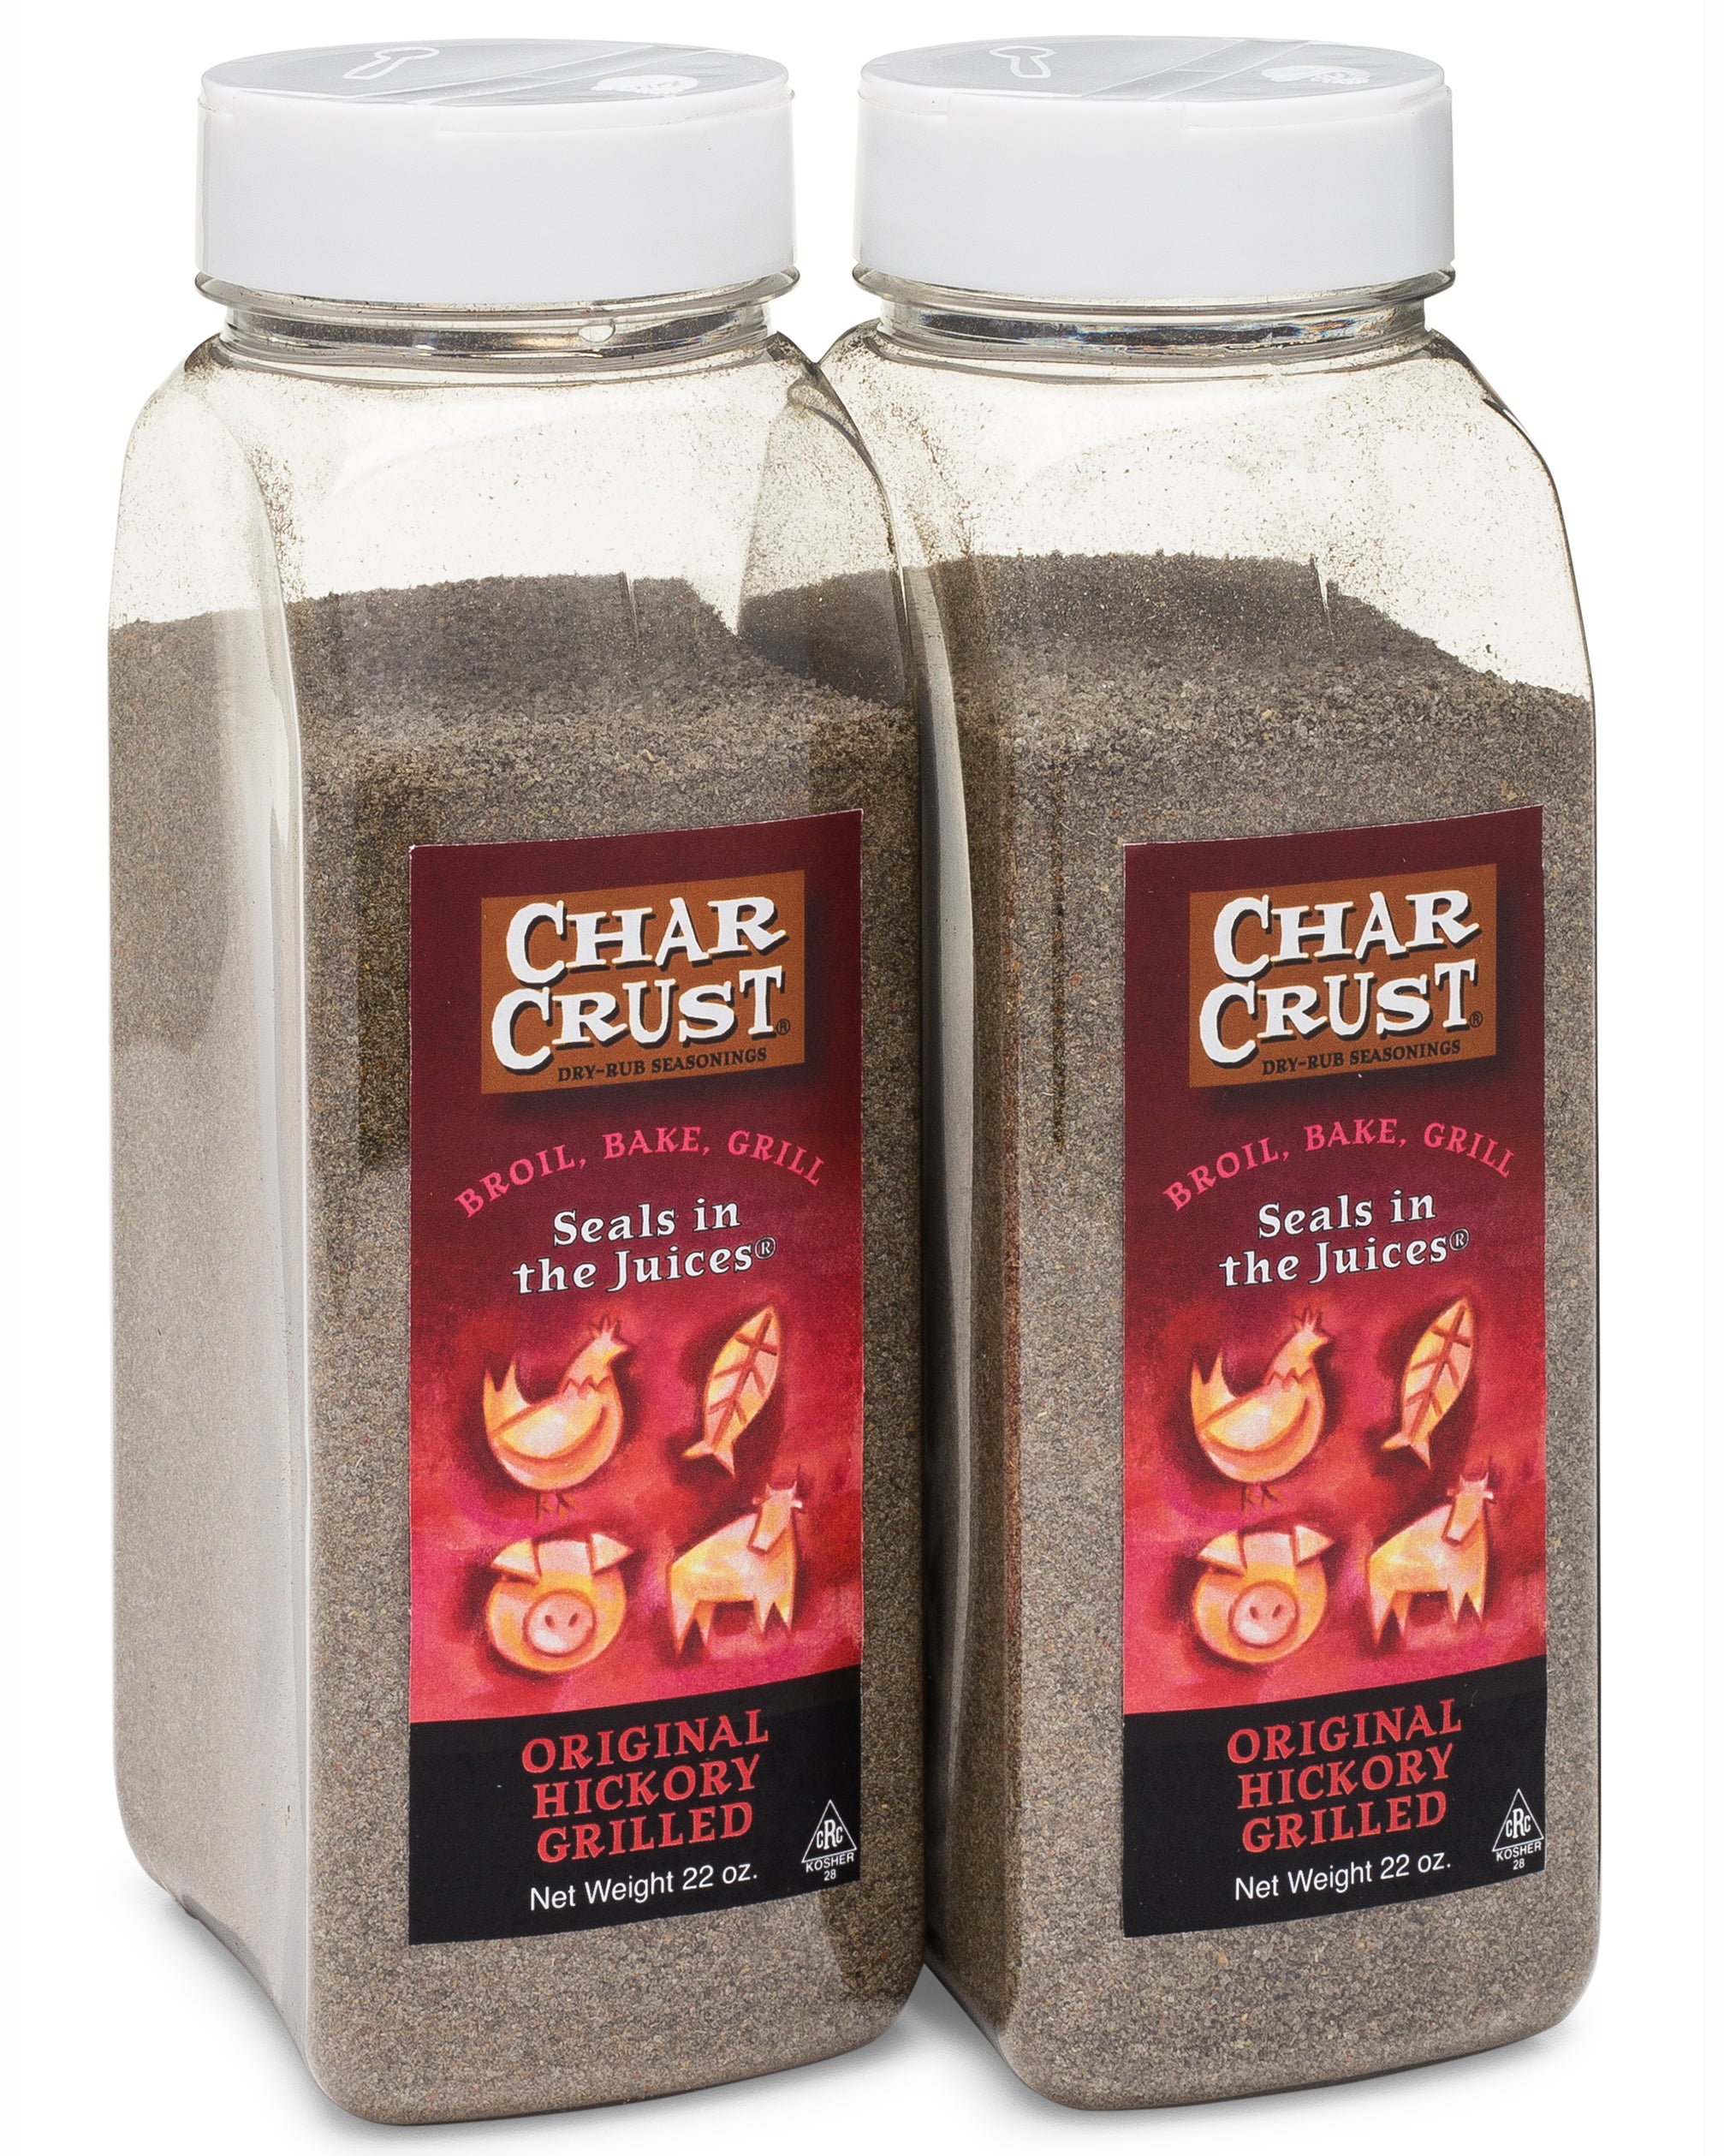 Char Crust Original Hickory Grilled Jars for foodservice. Great beef rub.